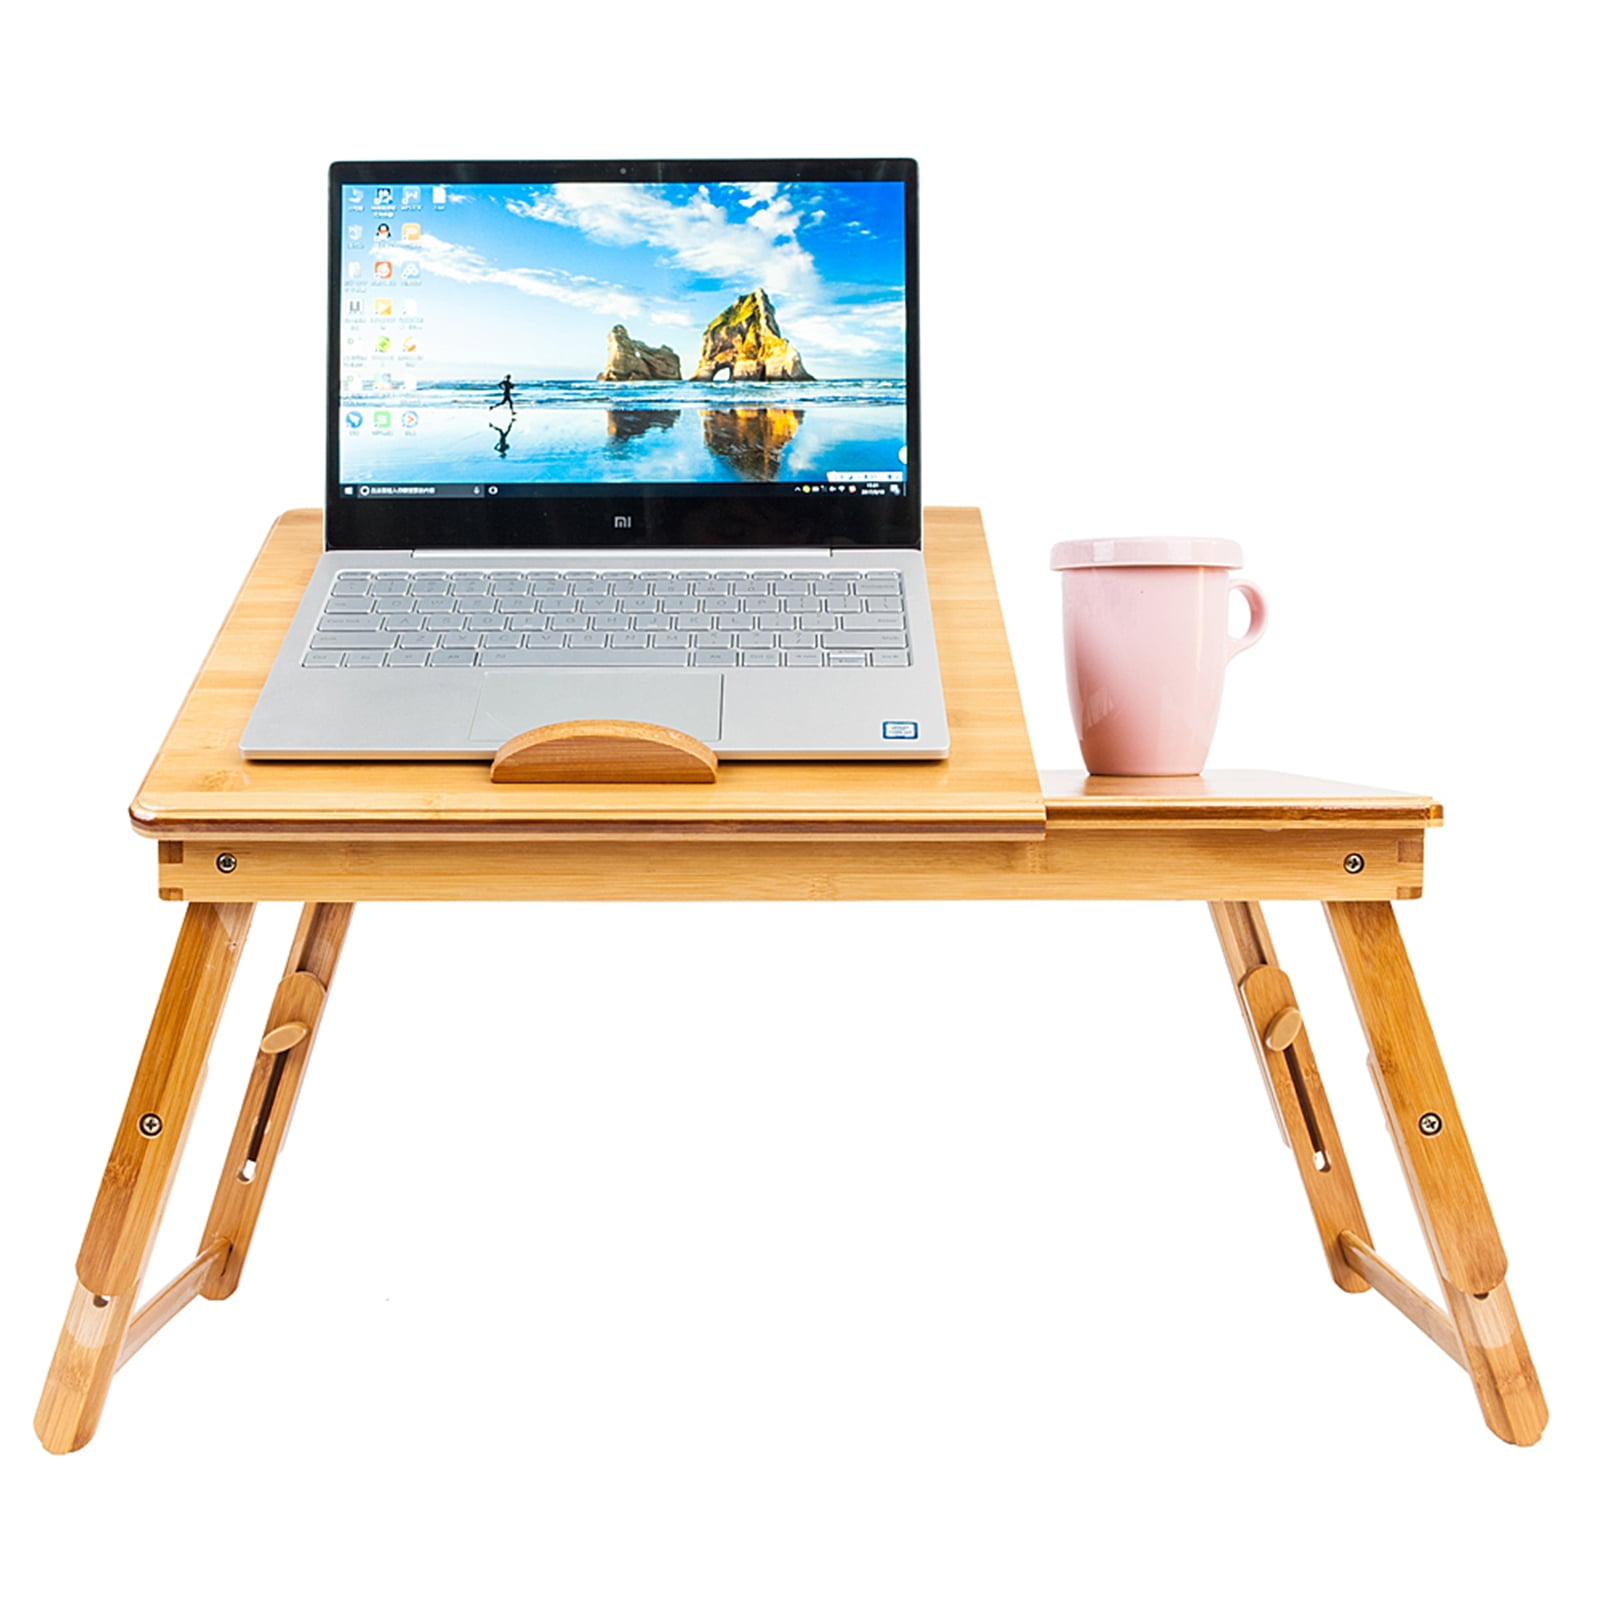 Details about   Bamboo Folding Lap Desk Laptop Desk Tray Bed Table Stand w/ Drawer Portable Home 